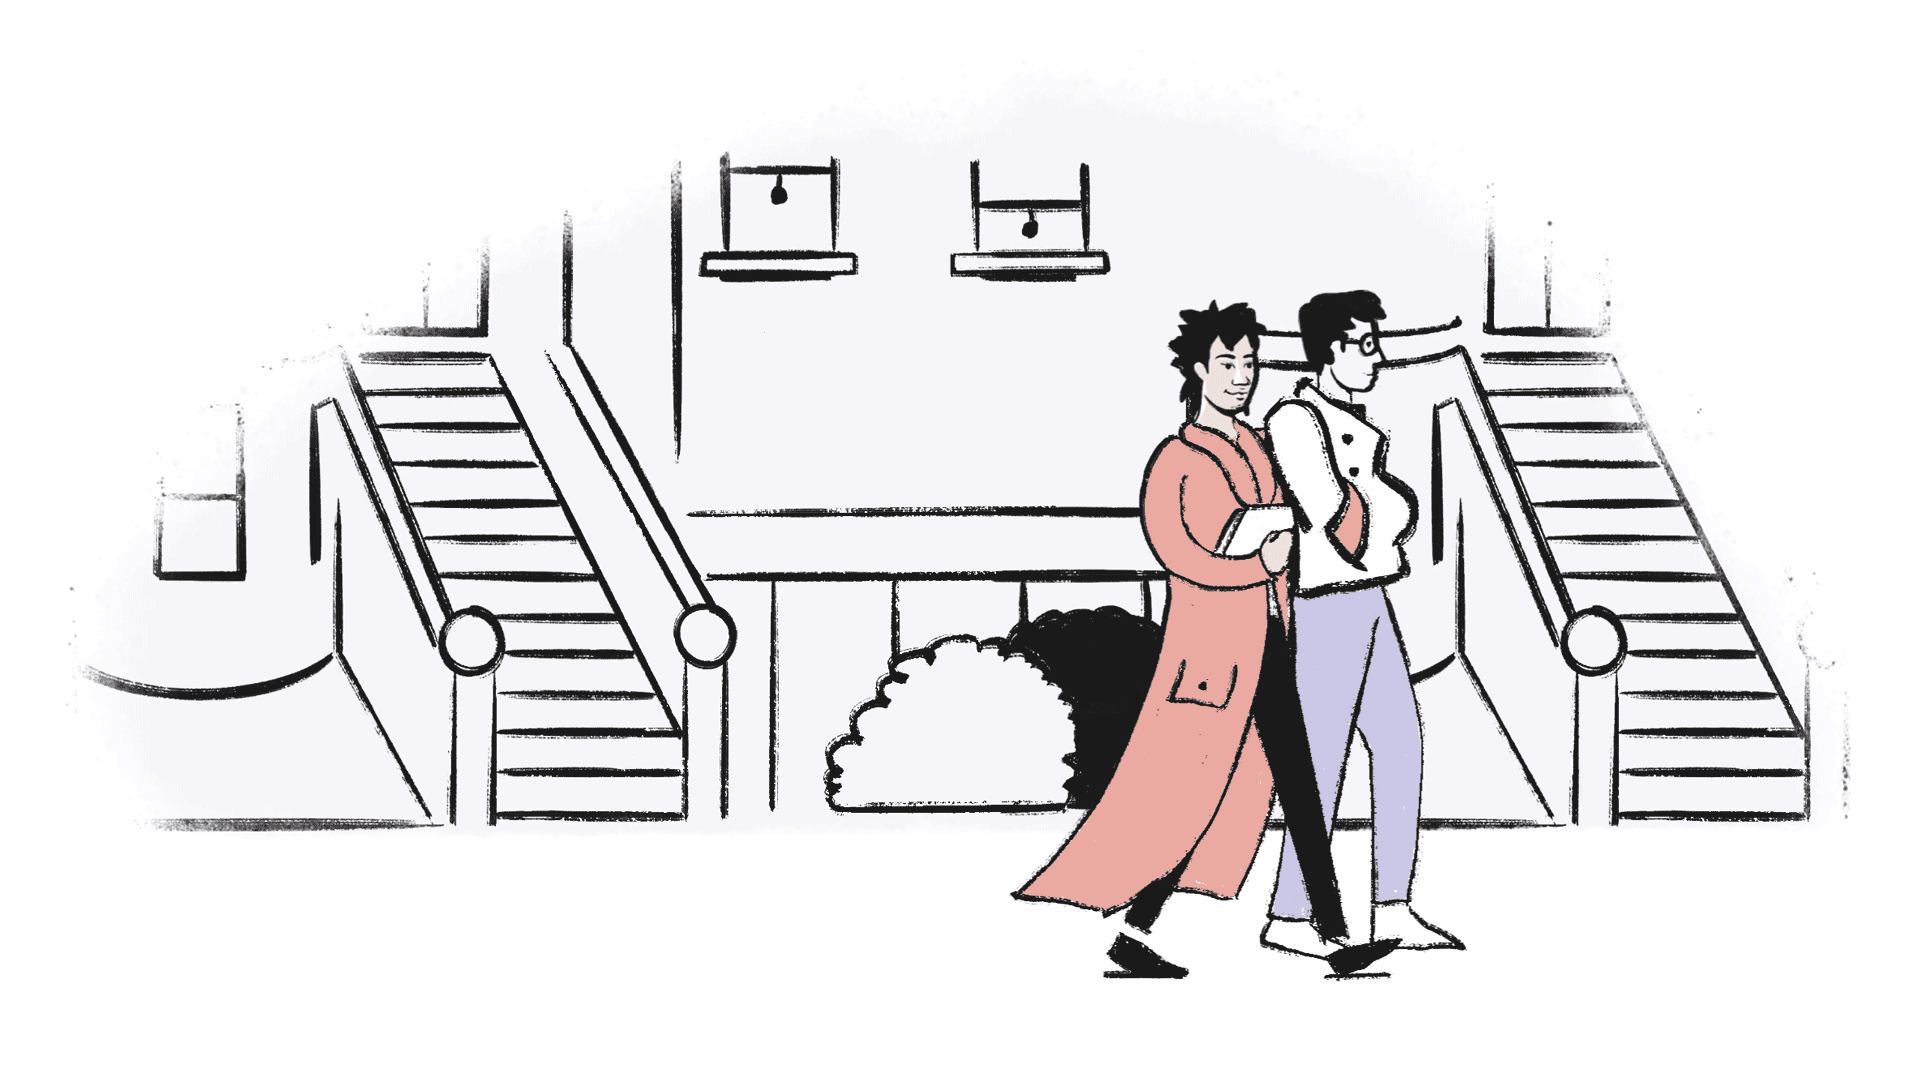 Illustration of two men on a date walking down the street